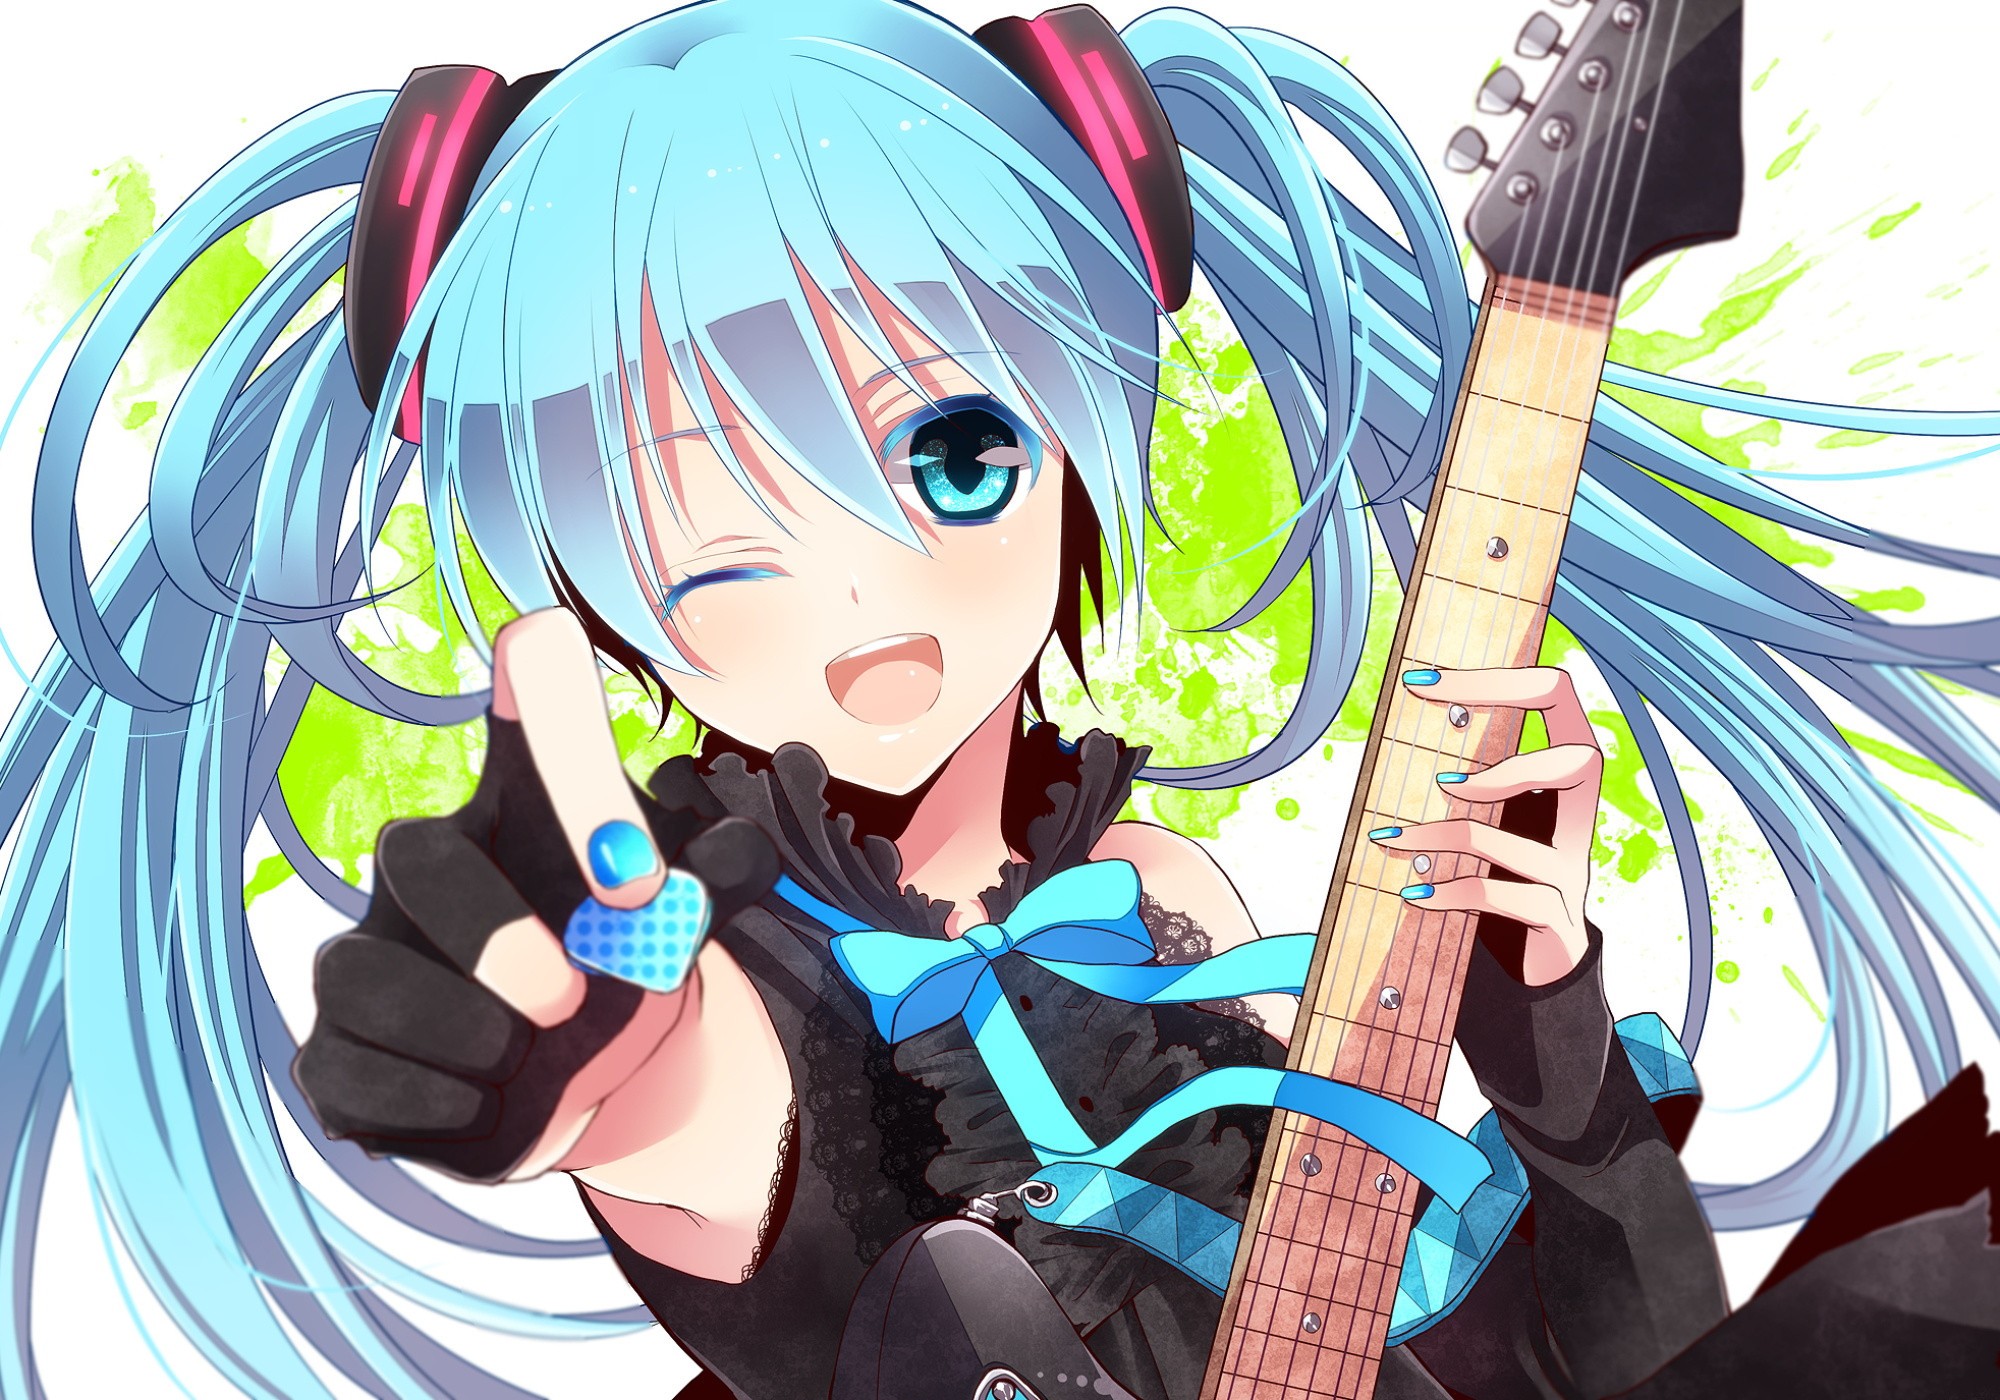 Anime 2000x1400 anime anime girls guitar blue hair Vocaloid Hatsune Miku musical instrument open mouth one eye closed blue nails painted nails plectrum